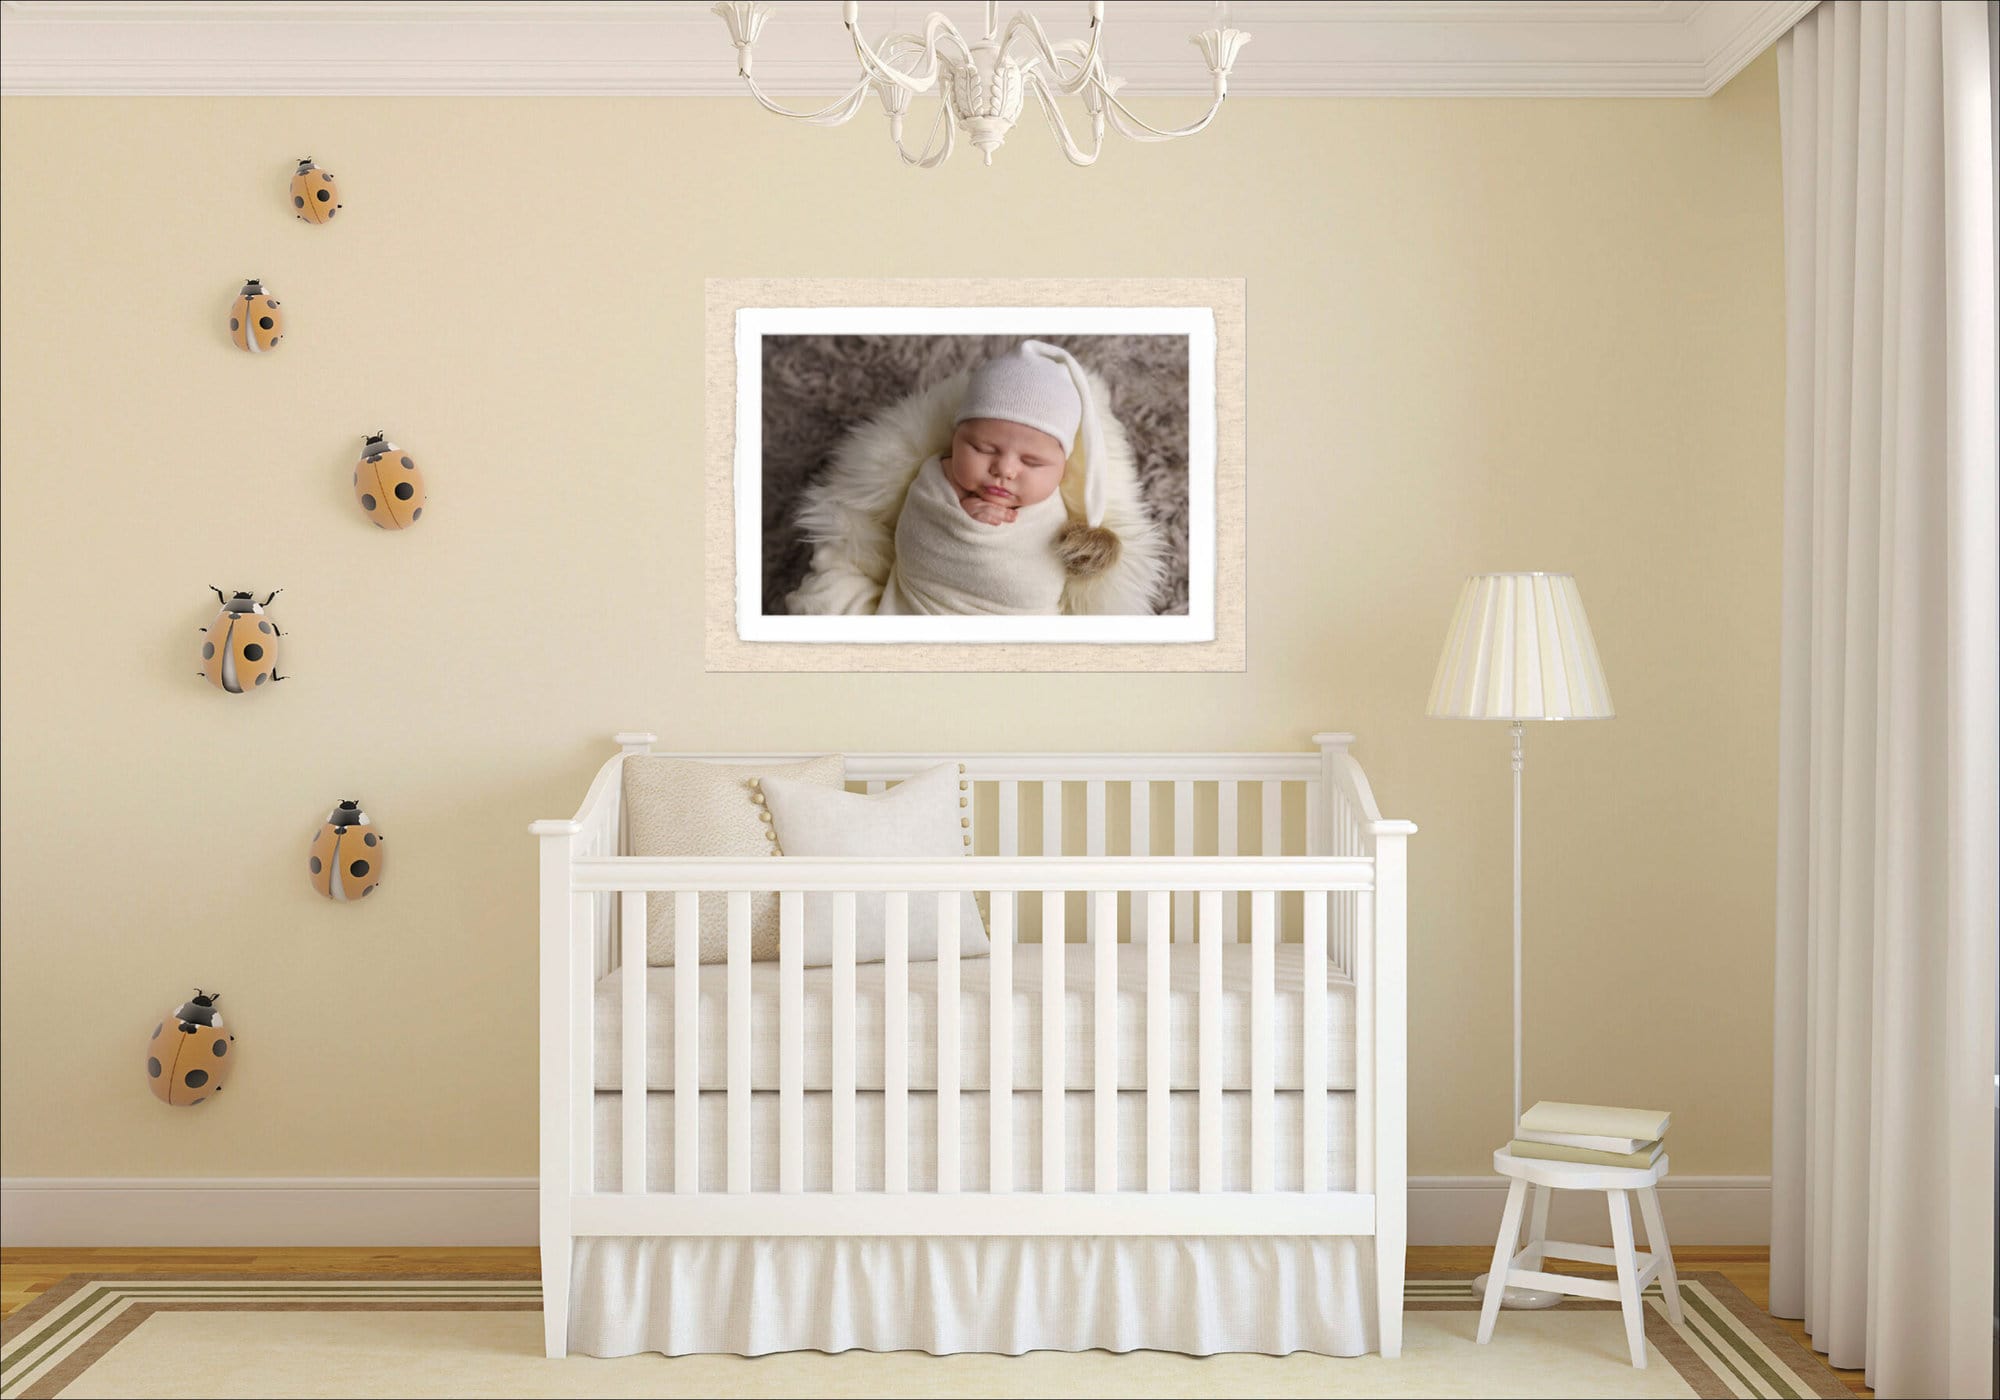 baby's nursery showing a photo of the baby above the cot